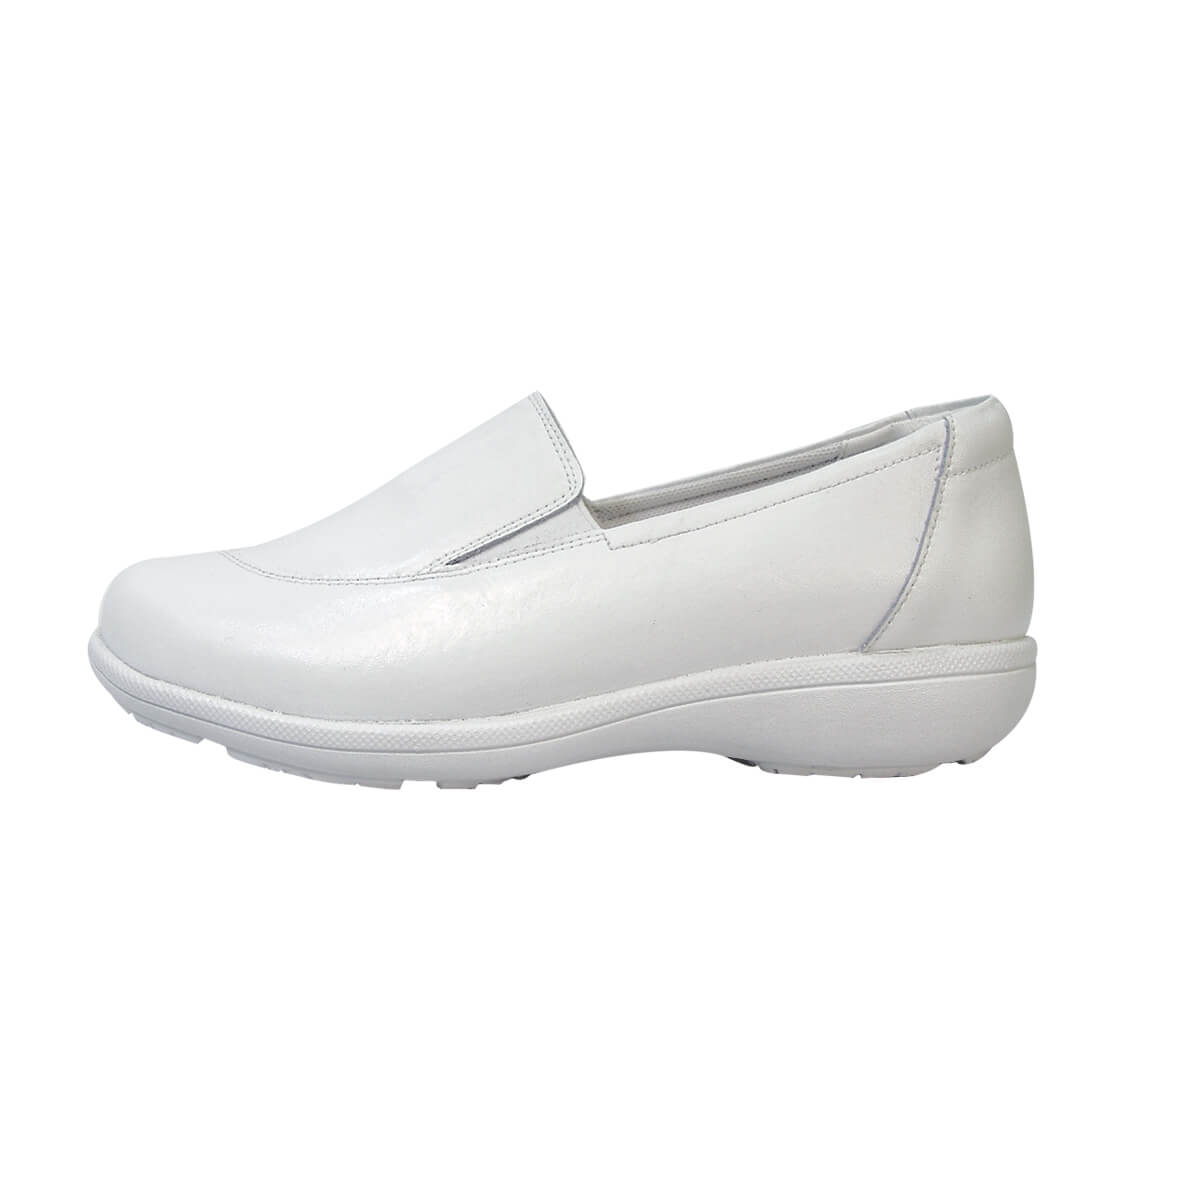 24 HOUR COMFORT Lila Women's Wide Width Leather Slip-On Shoes